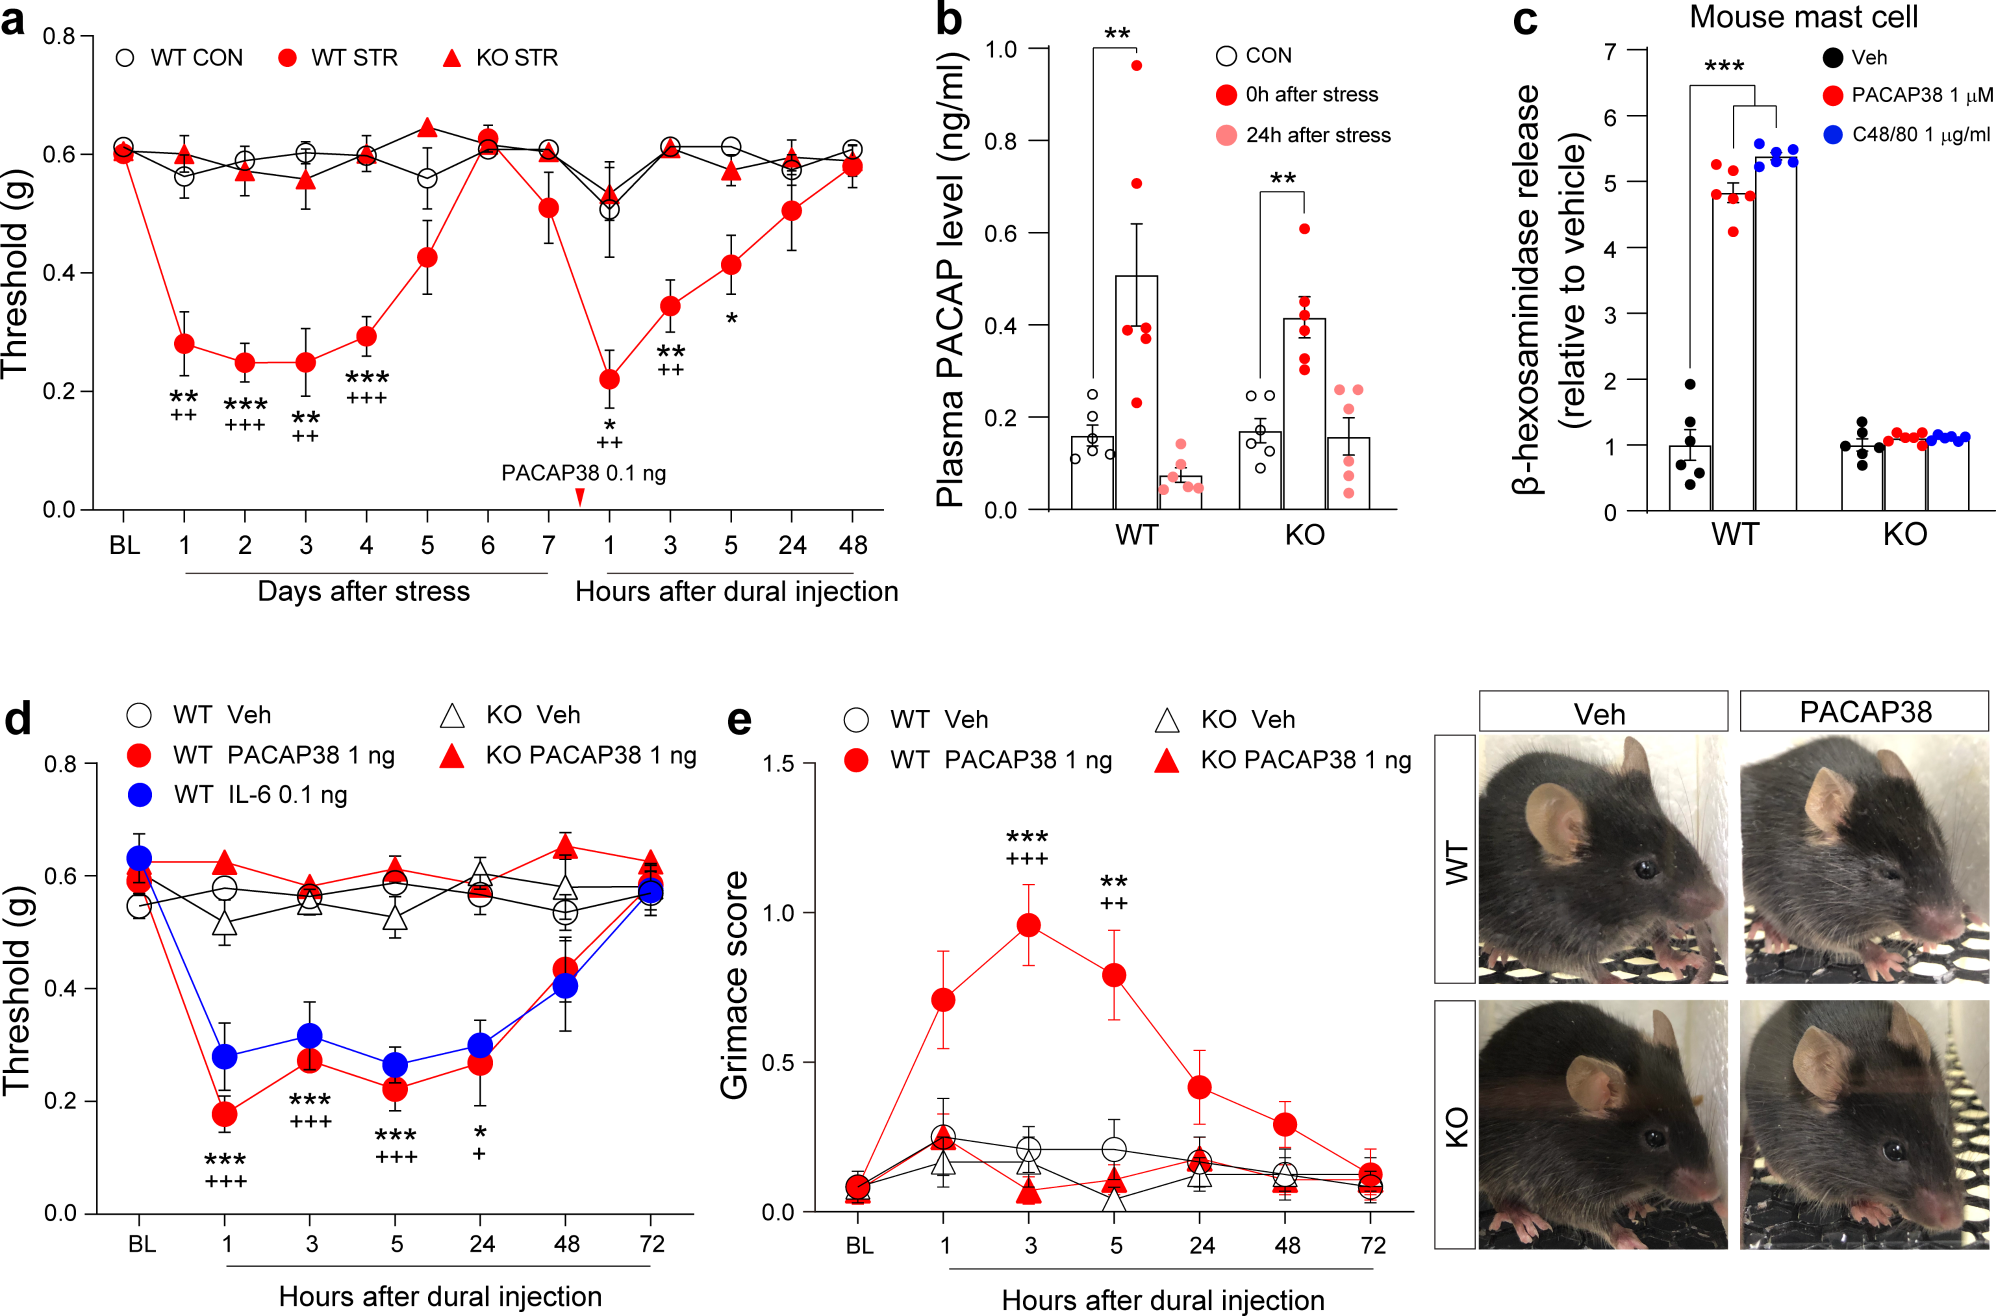 PACAP38/mast-cell-specific receptor axis mediates repetitive stress-induced headache in mice